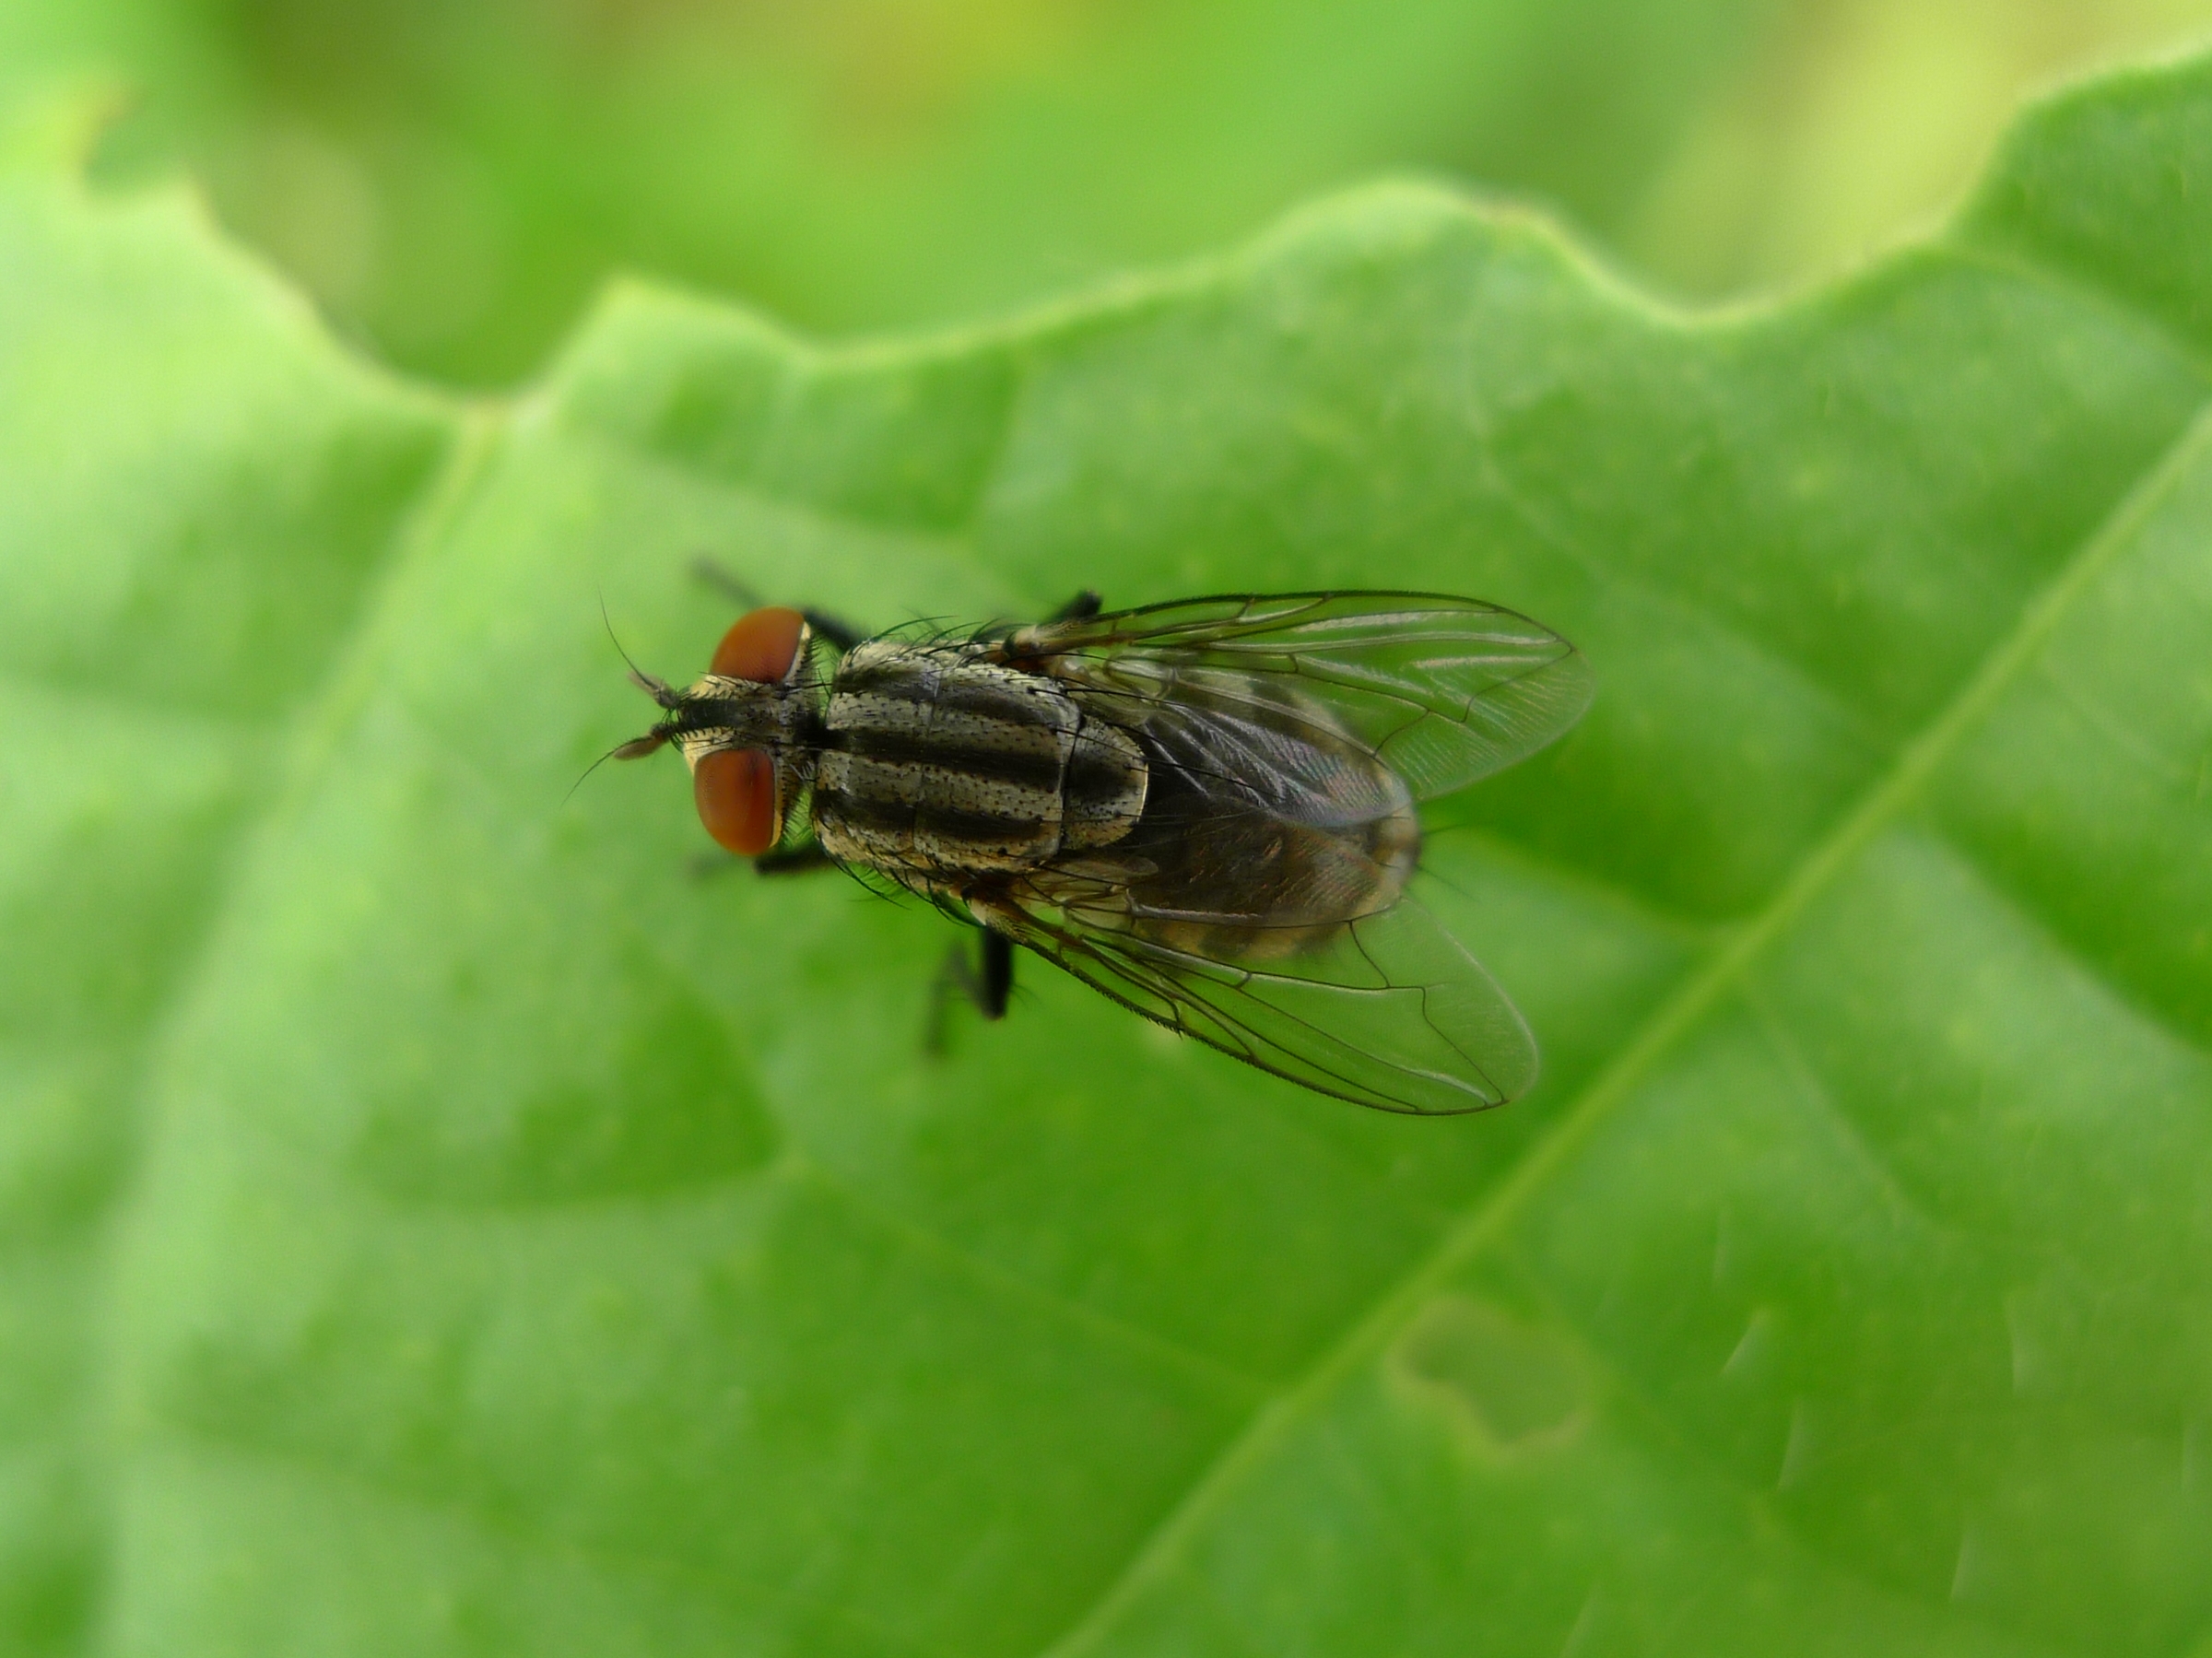 File:Grey and black striped fly with brown eyes (5693867603).jpg ...